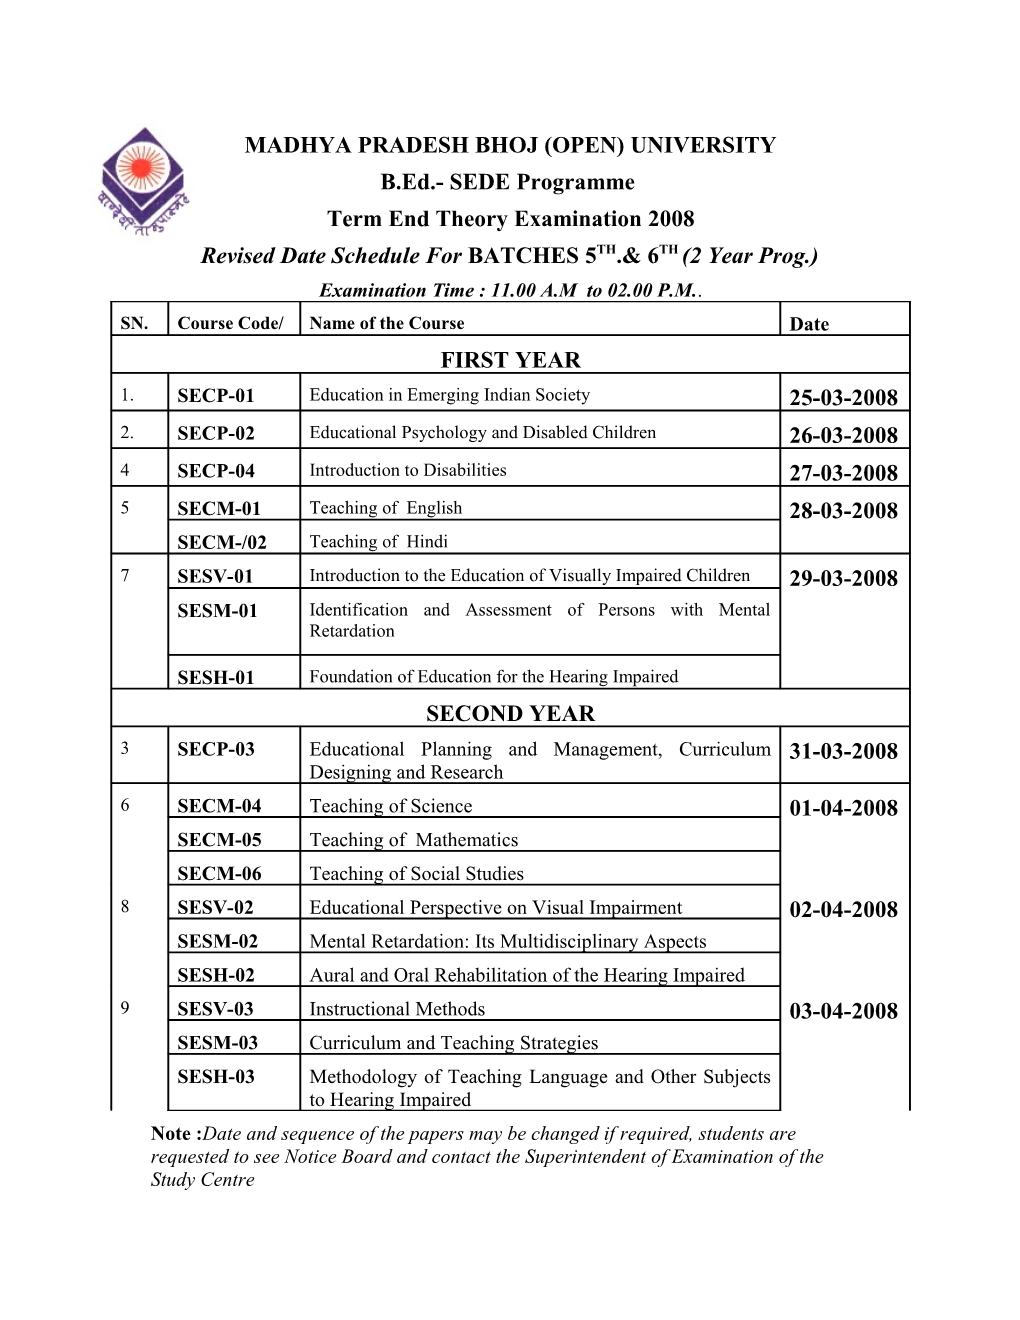 Revised Date Schedule for BATCHES 5TH.& 6TH (2 Year Prog.)